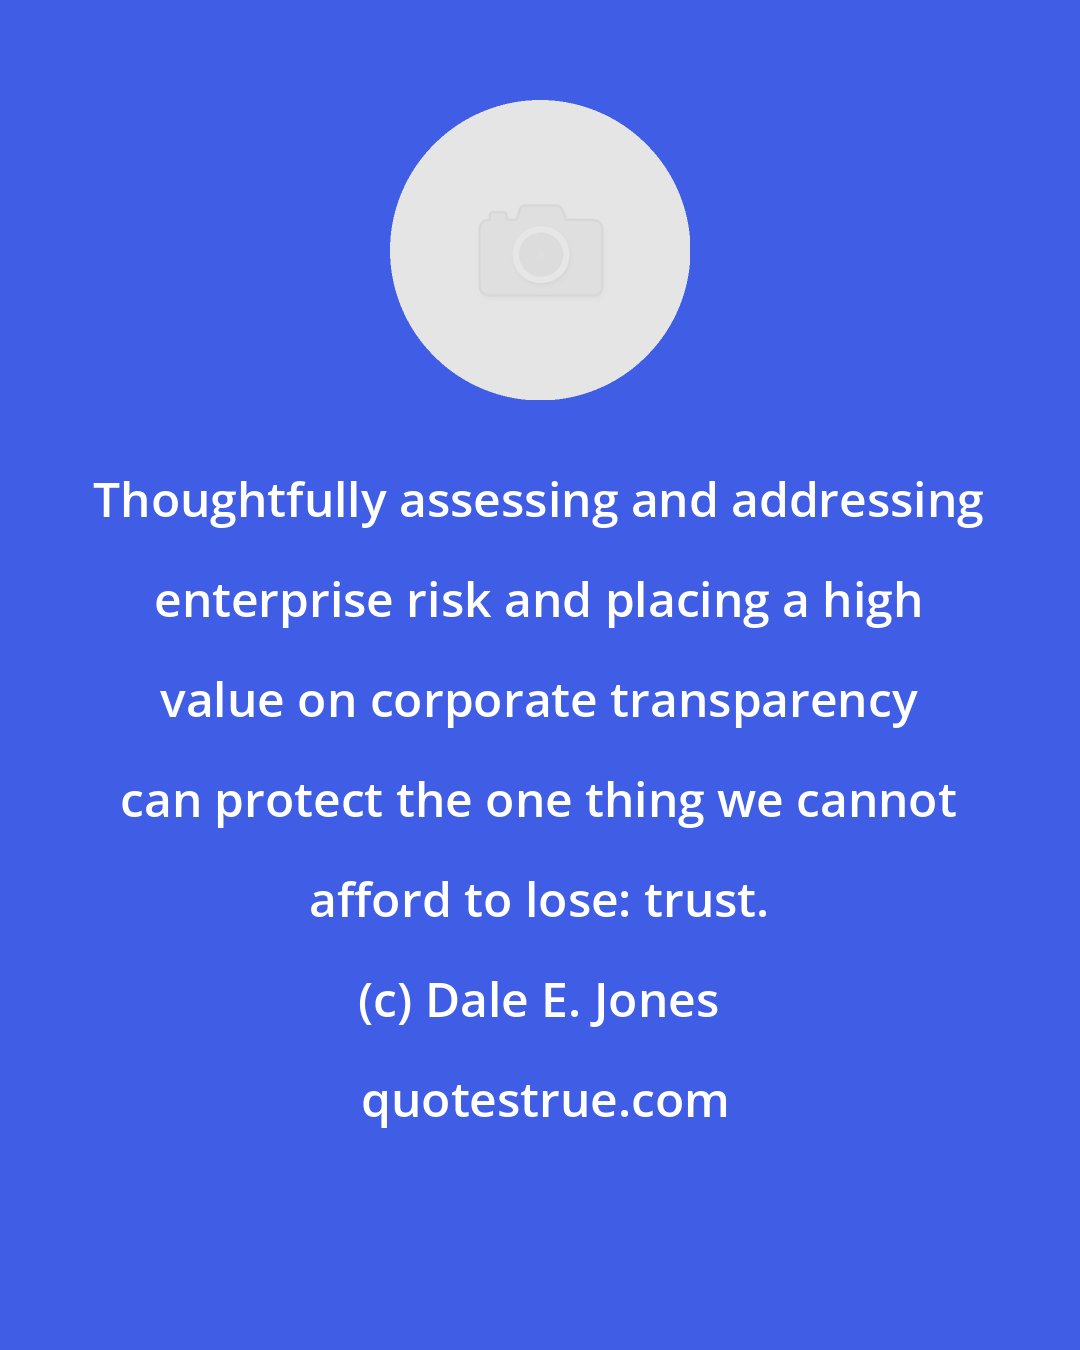 Dale E. Jones: Thoughtfully assessing and addressing enterprise risk and placing a high value on corporate transparency can protect the one thing we cannot afford to lose: trust.